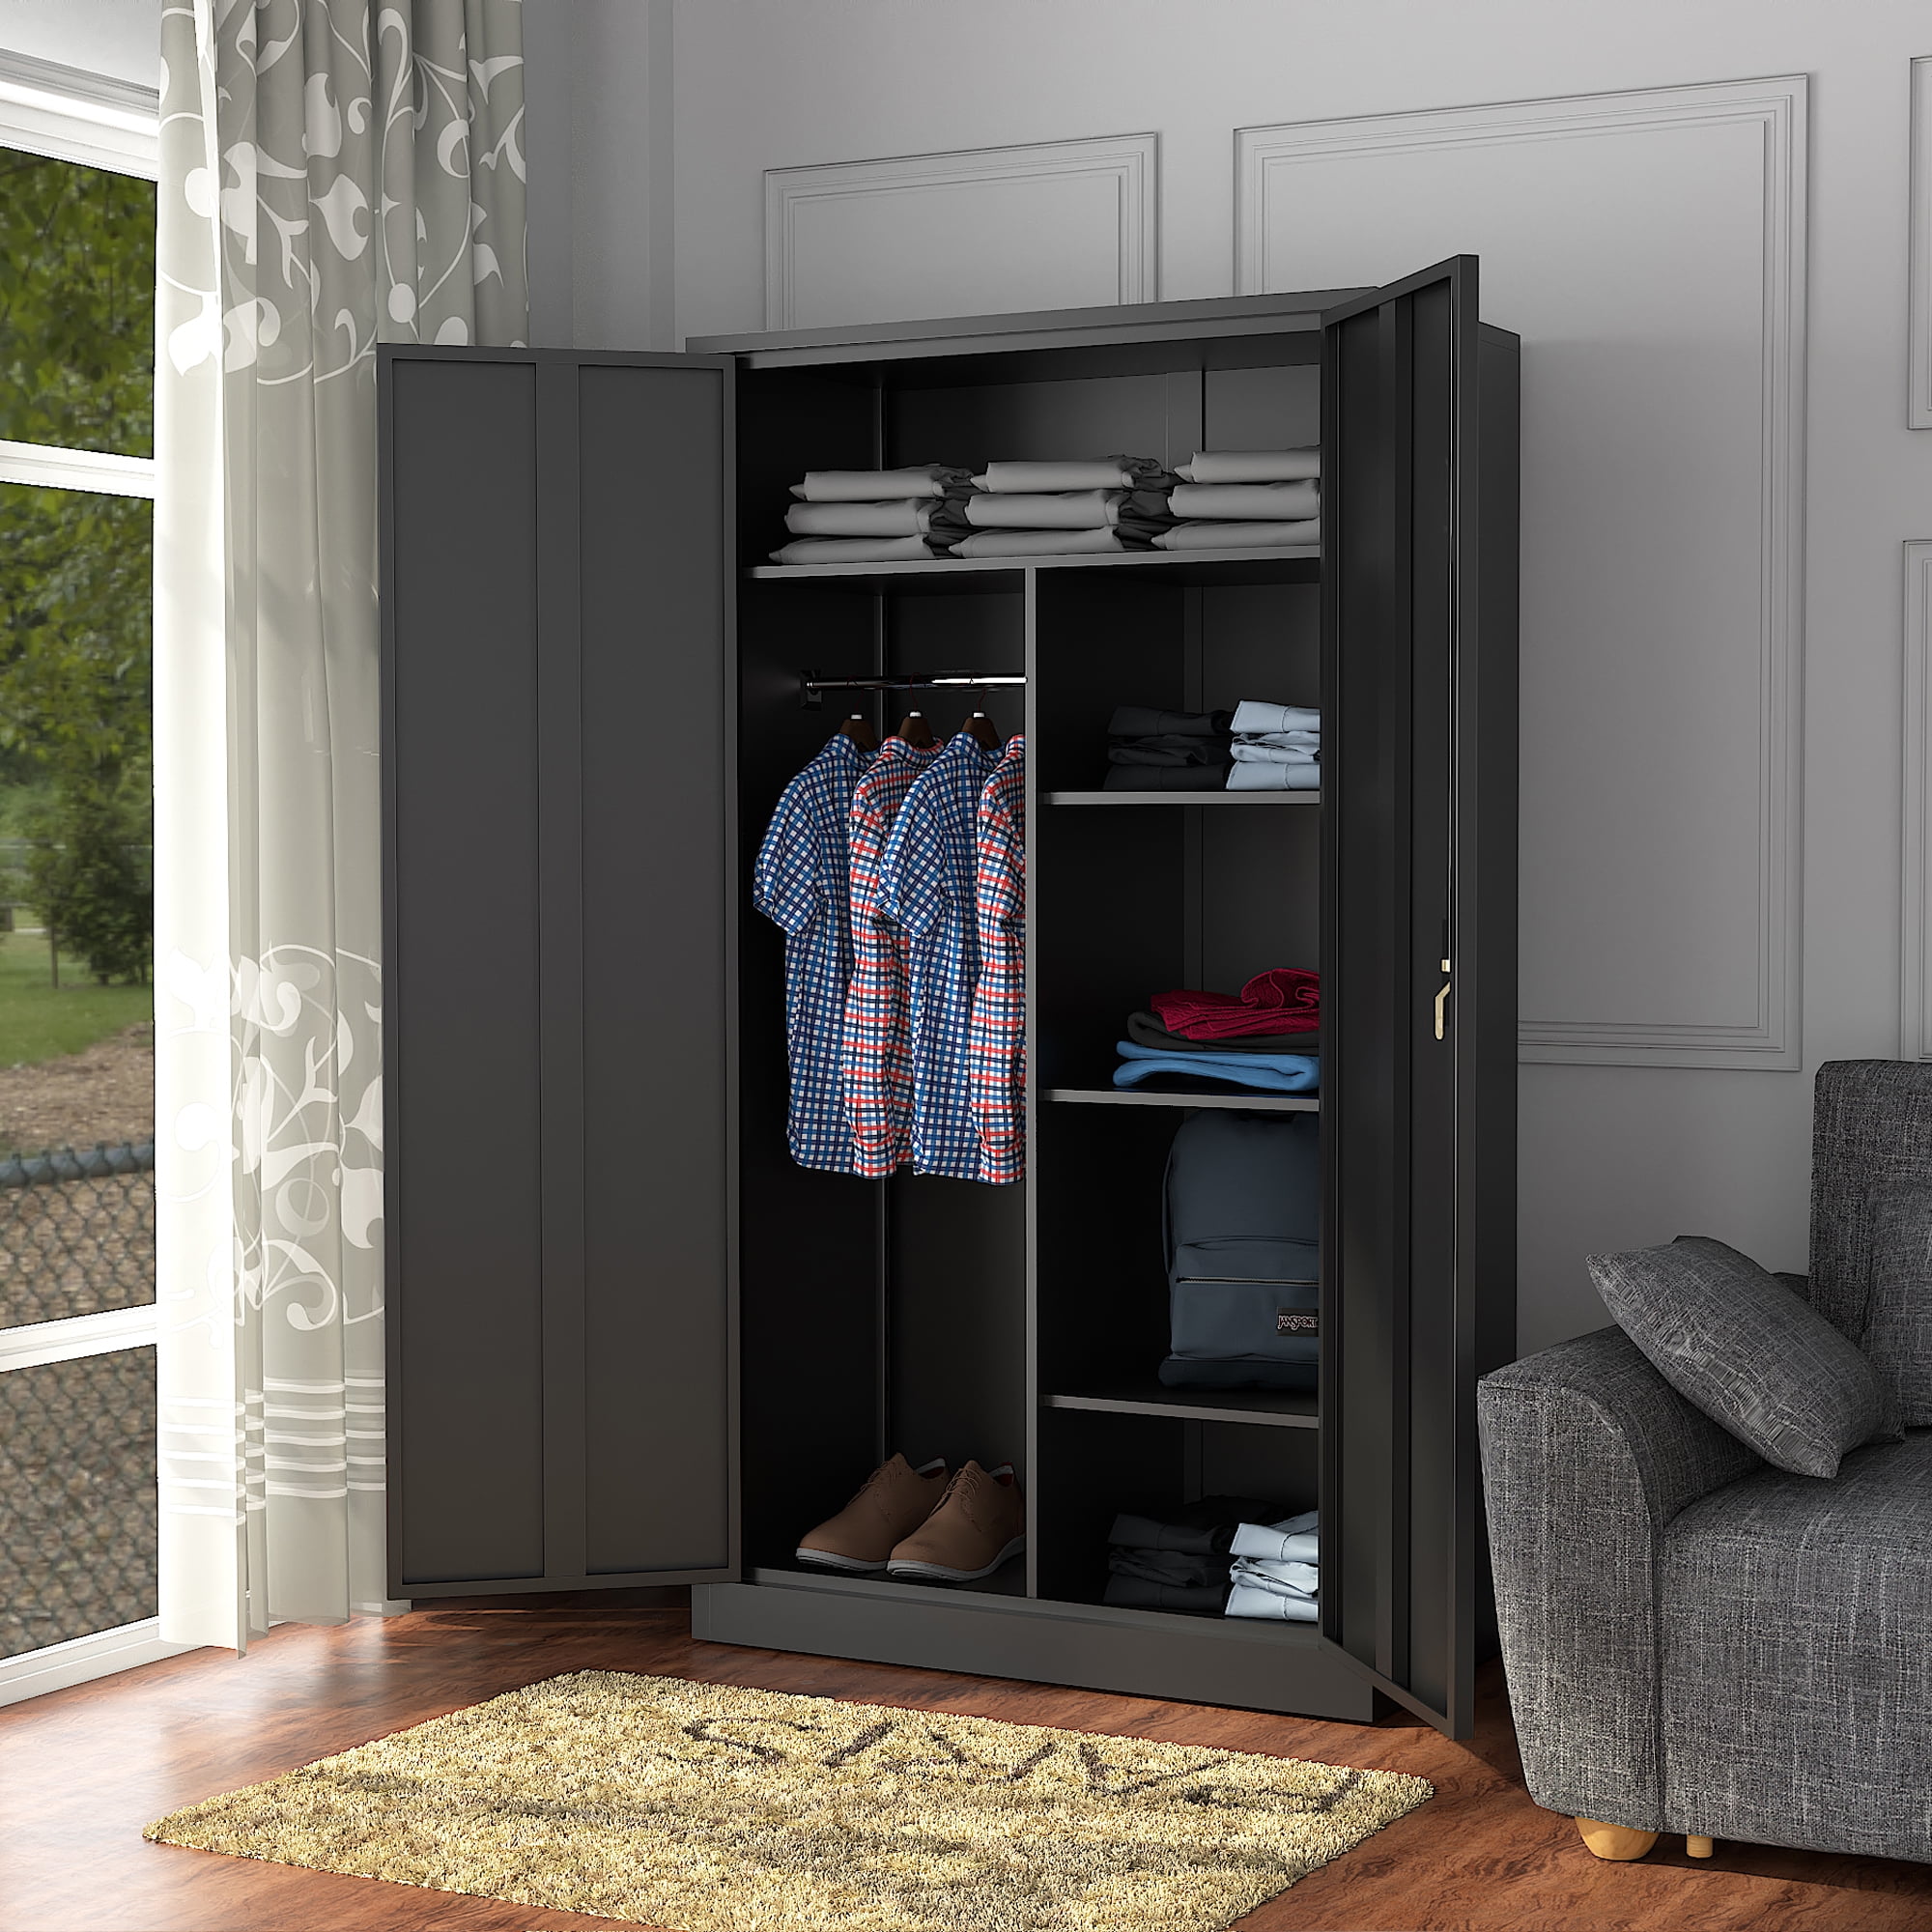 SUXXAN Metal Wardrobe Cabinet, Tall Storage Cabinet with Doors and Shelves,  Steel Locker Cabinet with Hanging Rod and Adjustable Shelves, Home Office